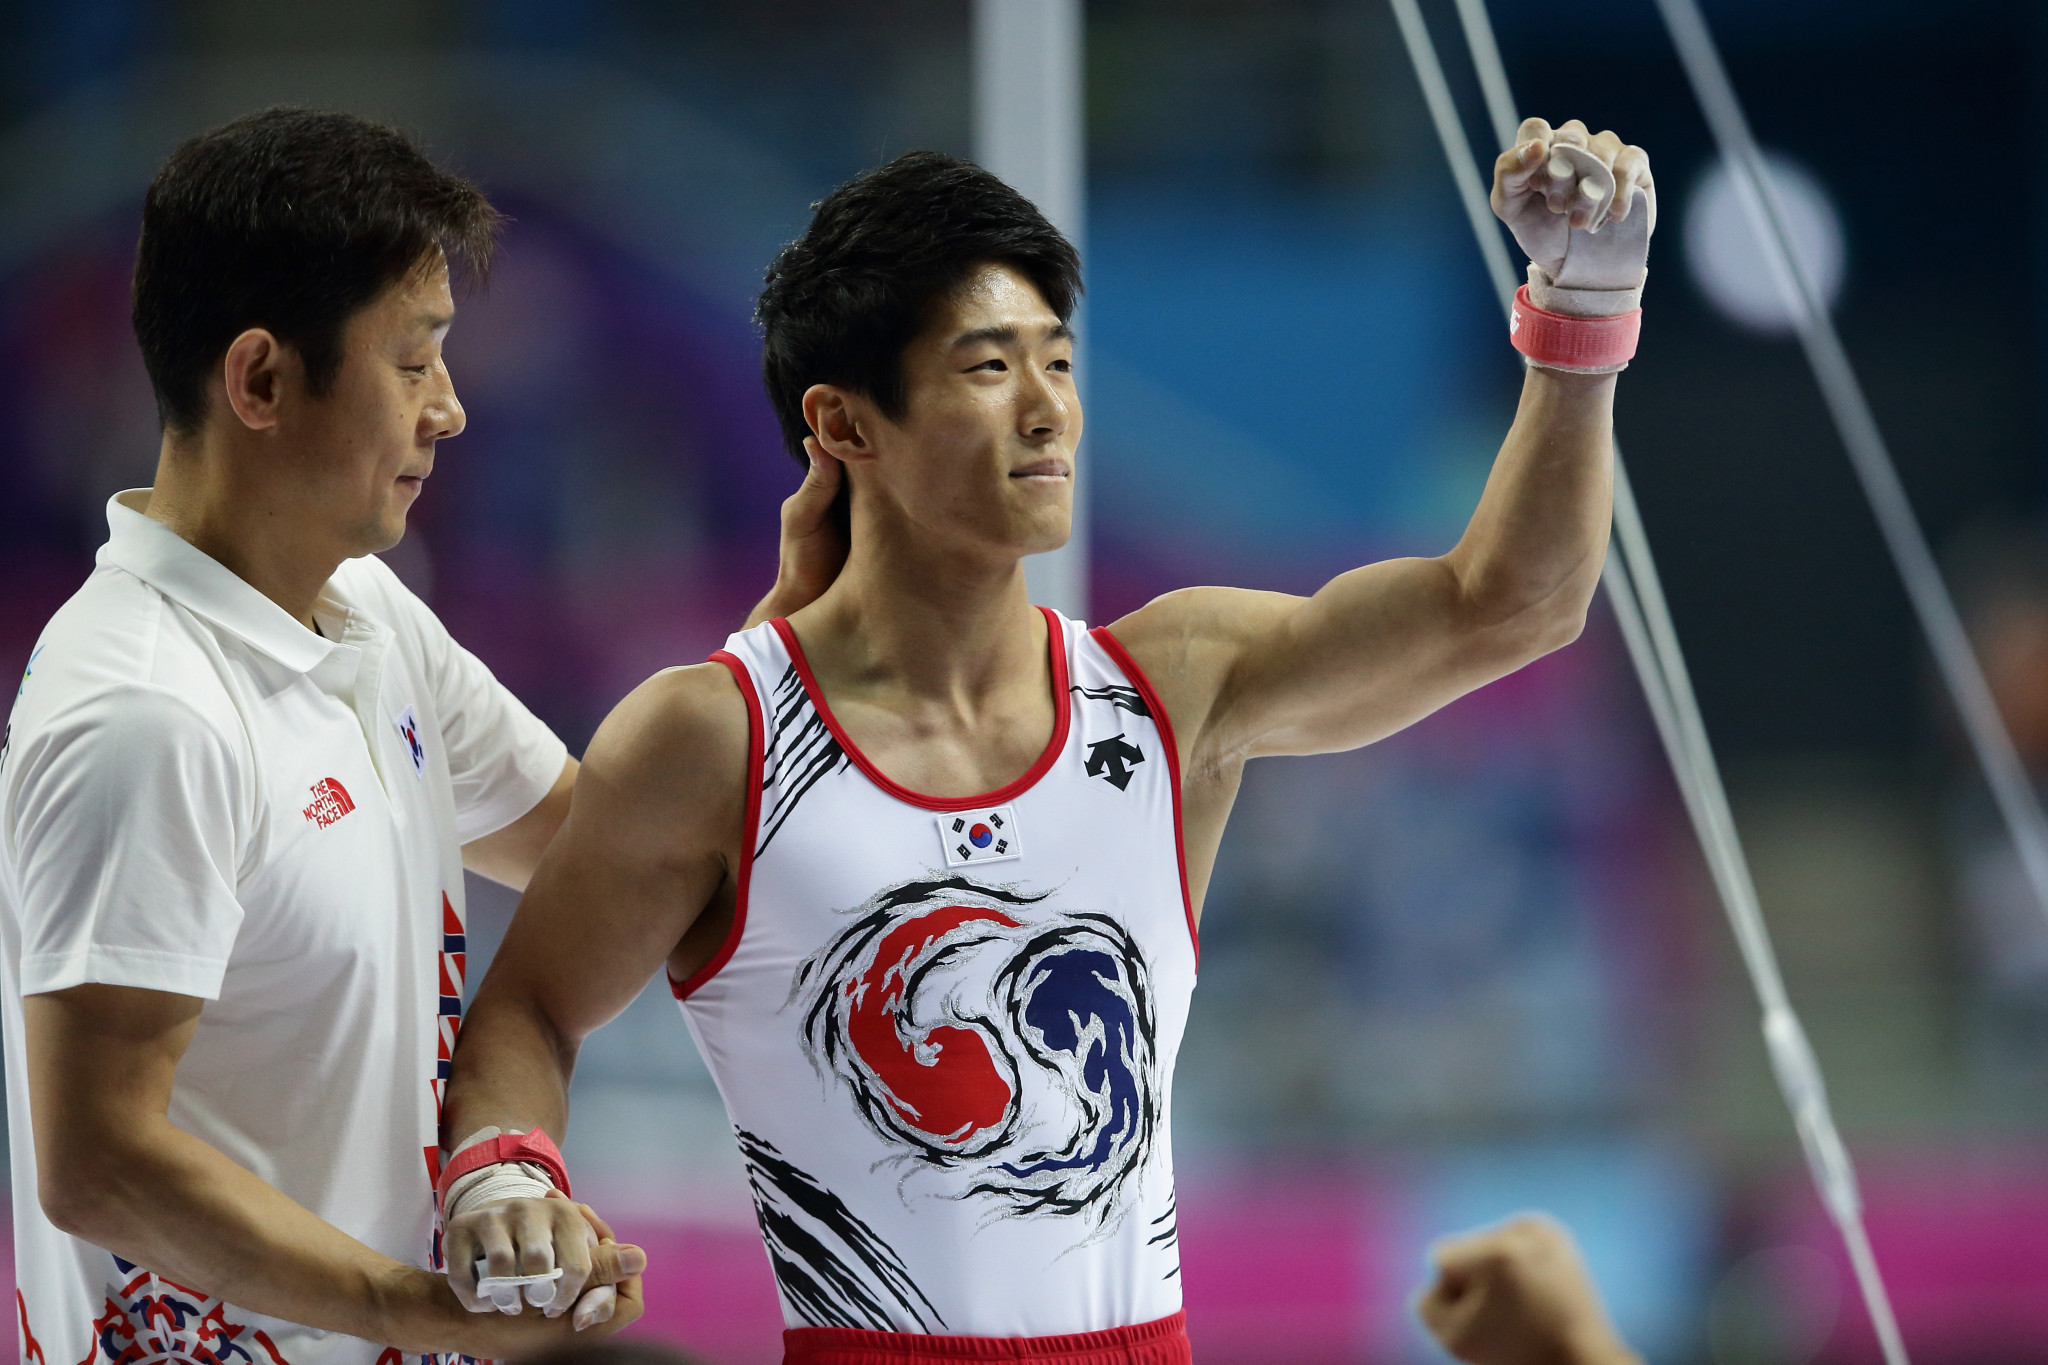 London Olympic champion Hakseon Yang won the men's vault today in Baku ©Getty Images